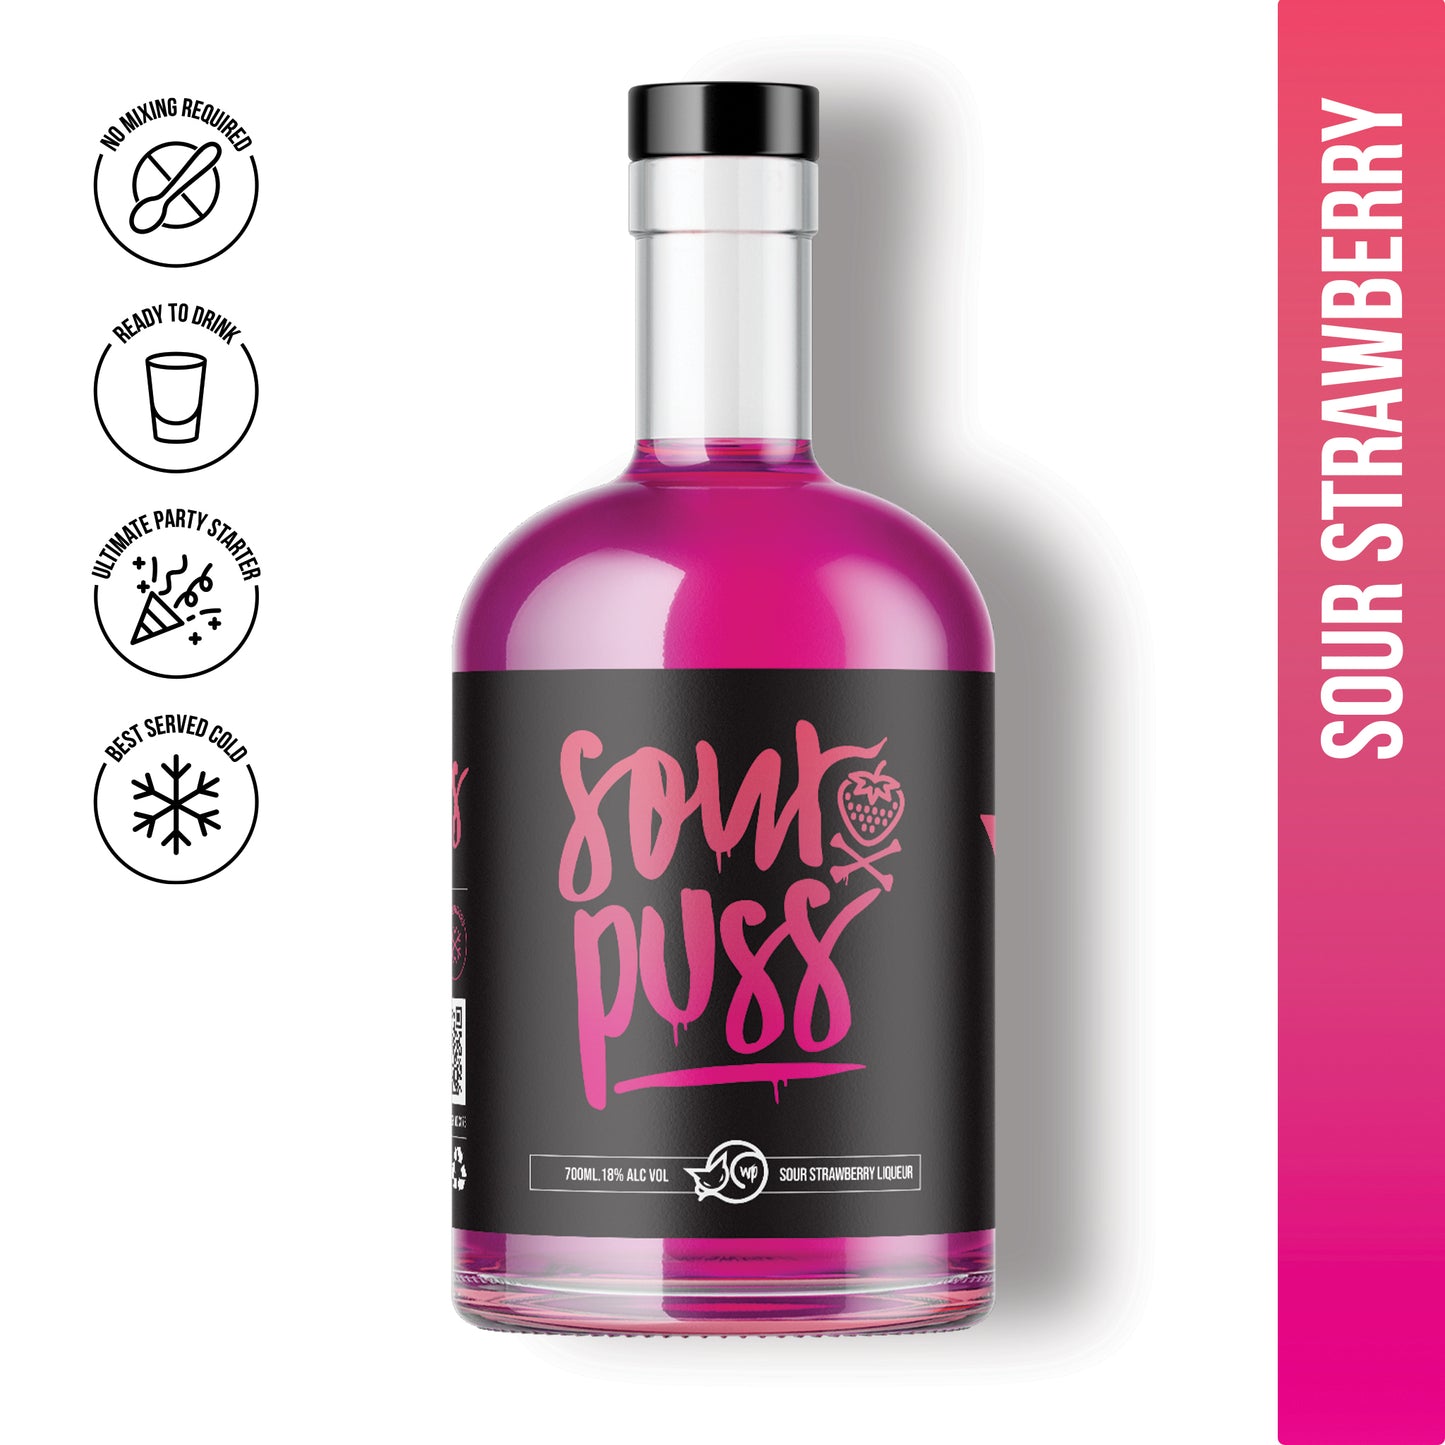 Sour Puss Ultimate Mega Pack - 80Proof 